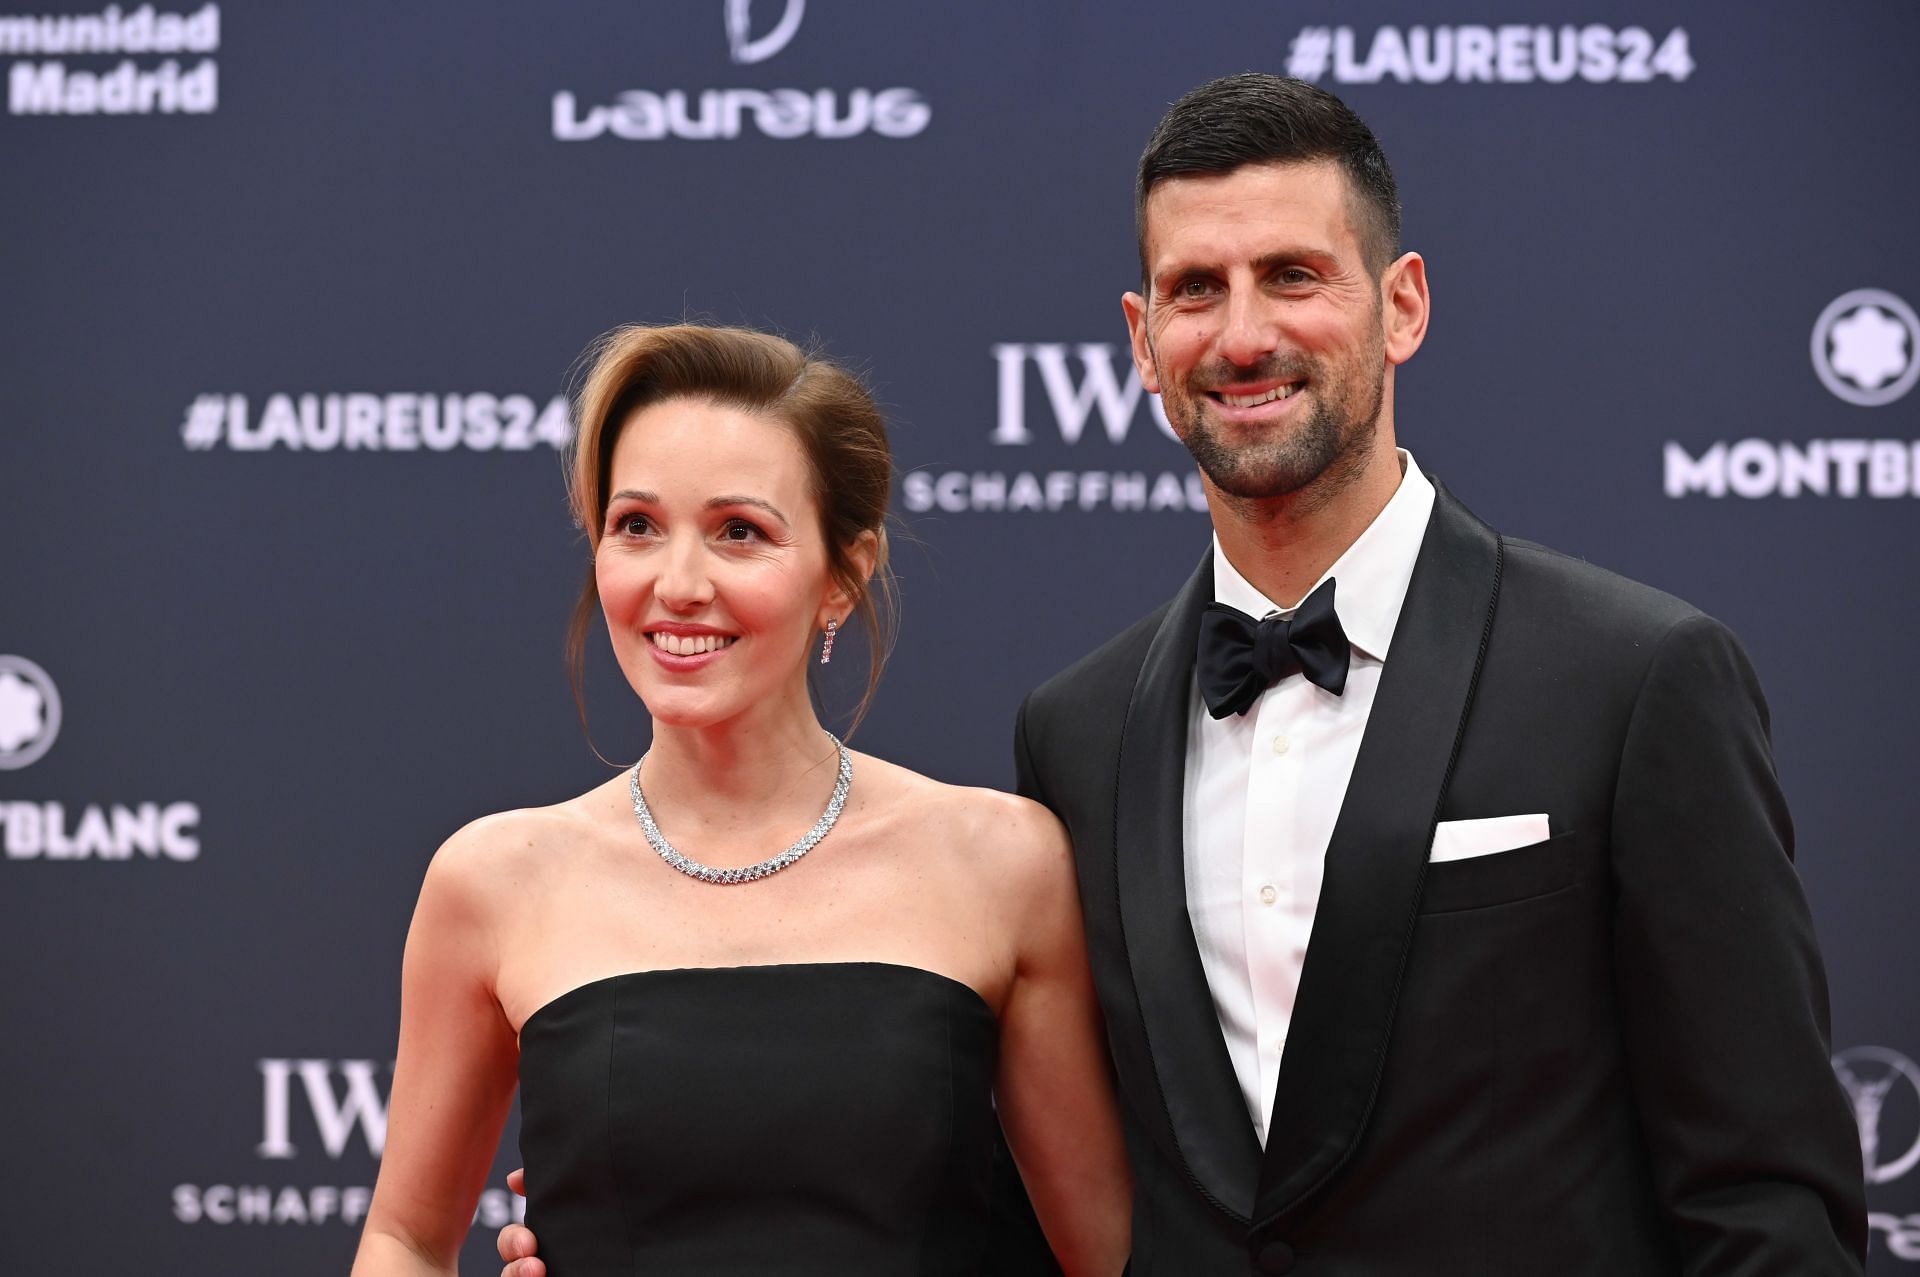 Djokovic and his wife at the Laureus Awards in Madrid